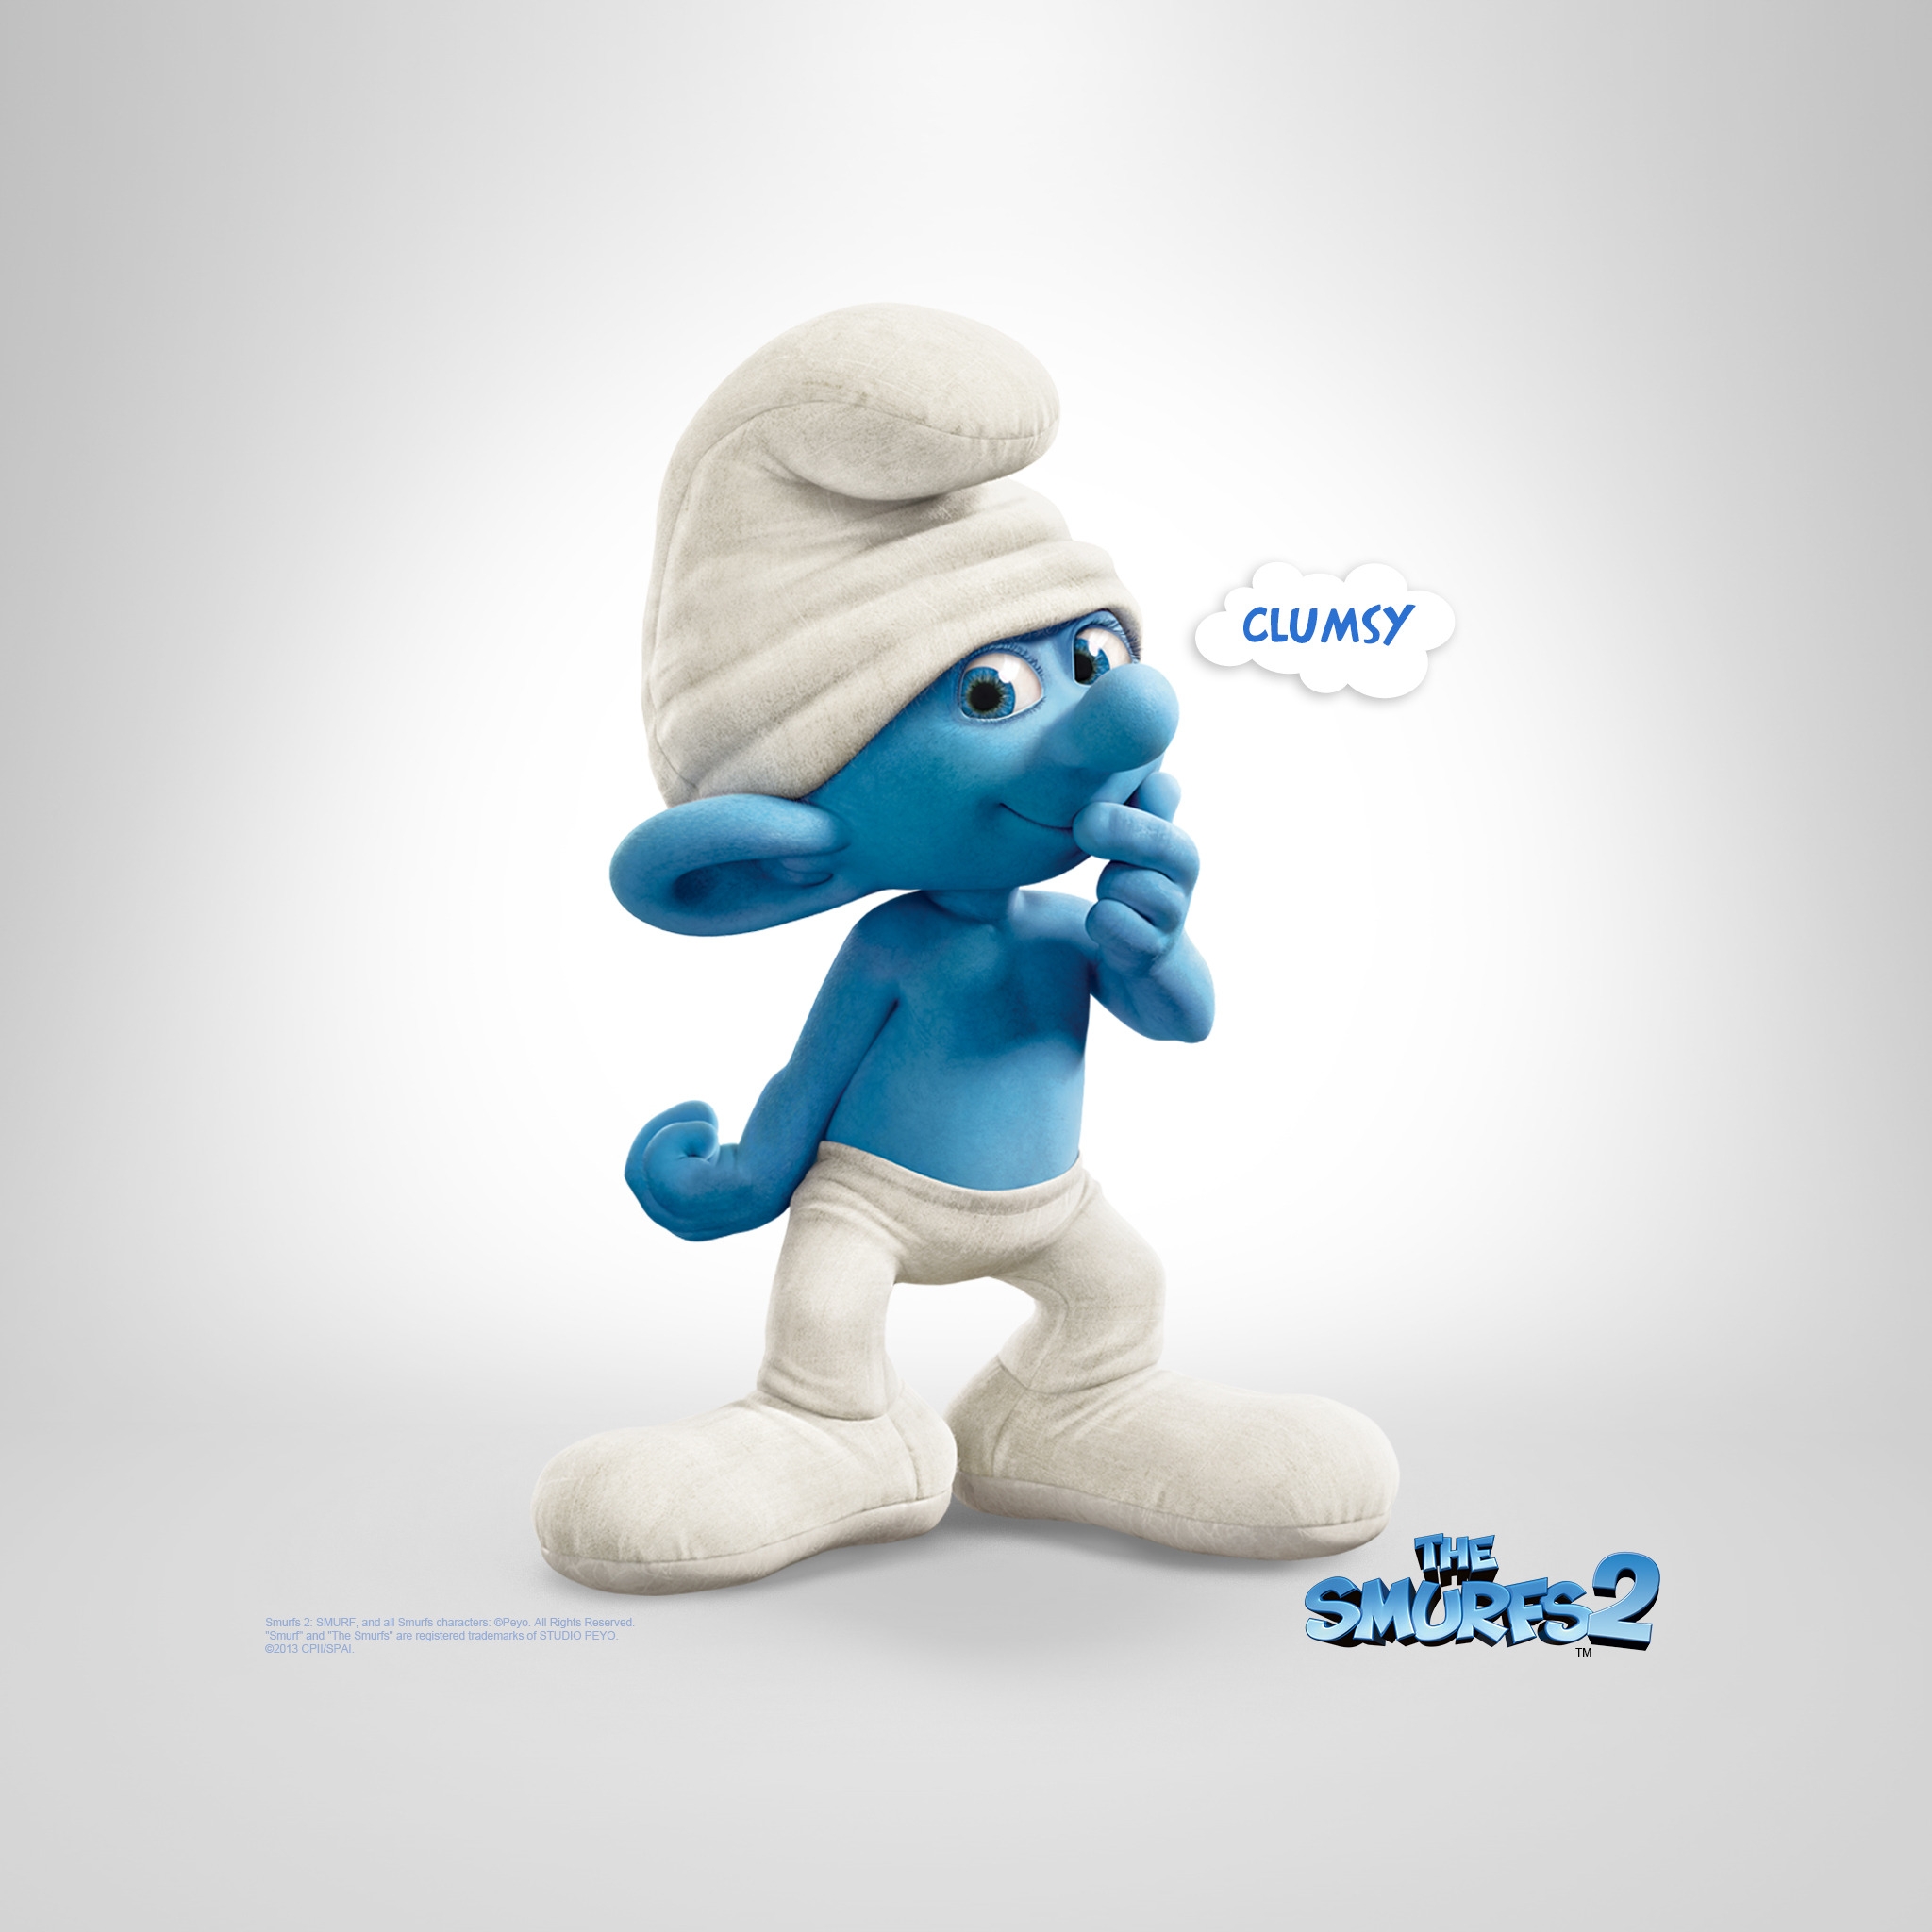 Clumsy The Smurfs 2 for 2048 x 2048 New iPad resolution